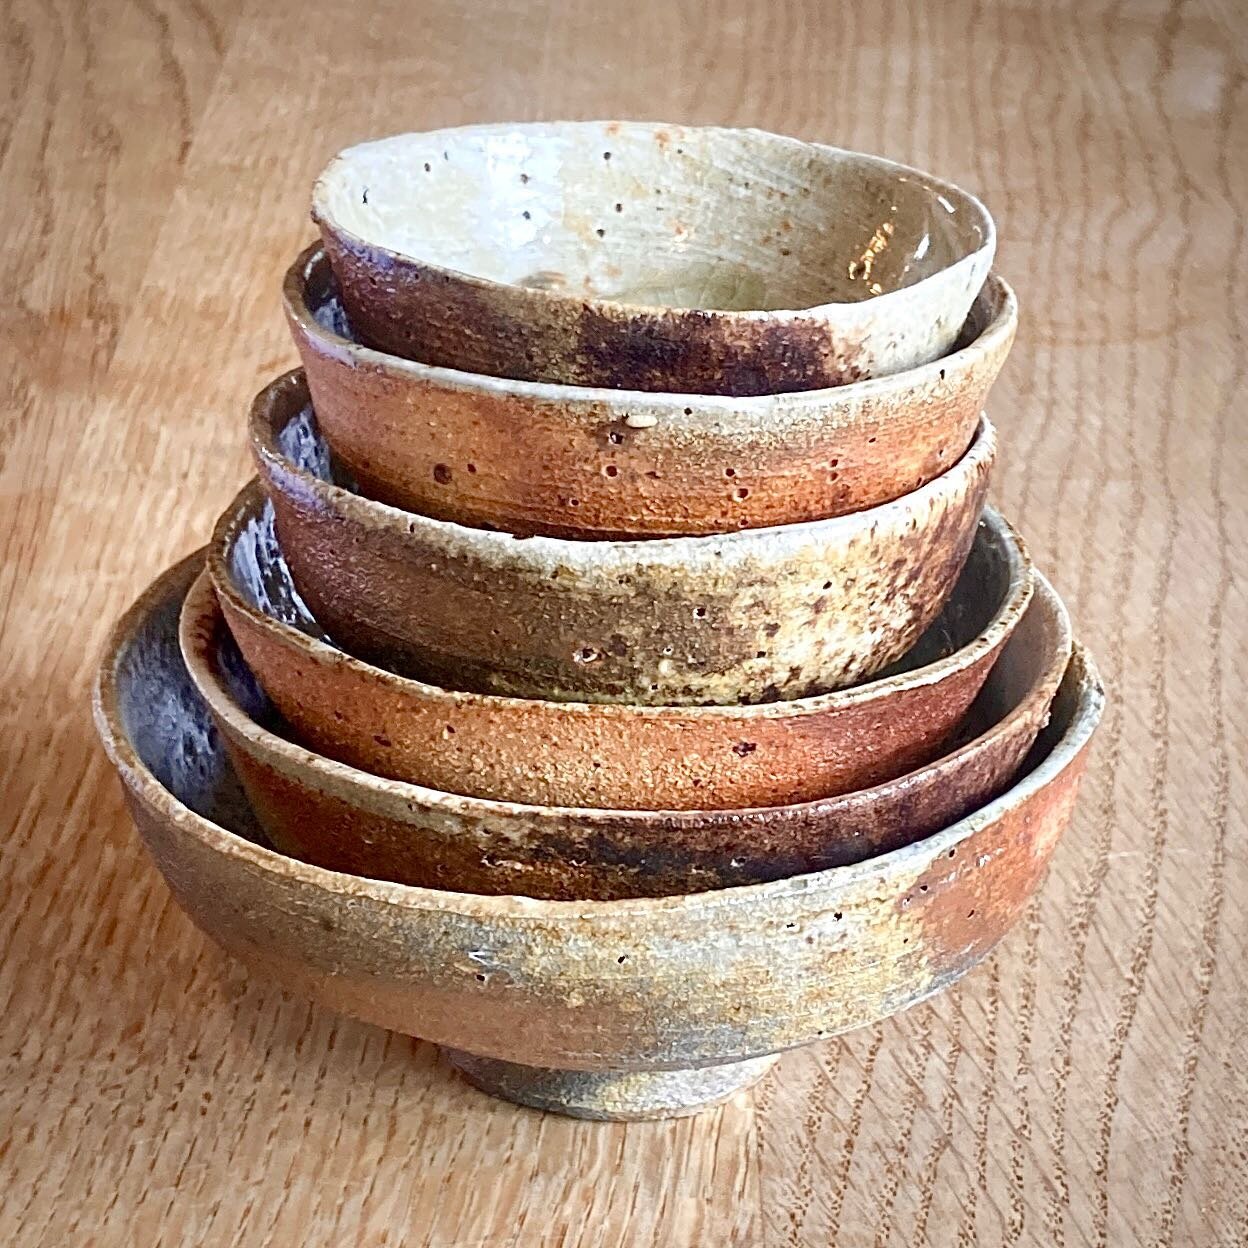 These are by far the simplest things I put in the anagama @oxforduniversitykilns and, in many ways, they were the most successful.
.
An all purpose buff stoneware clay, lightened a little by blending it with ST material, grogged a little with the tin